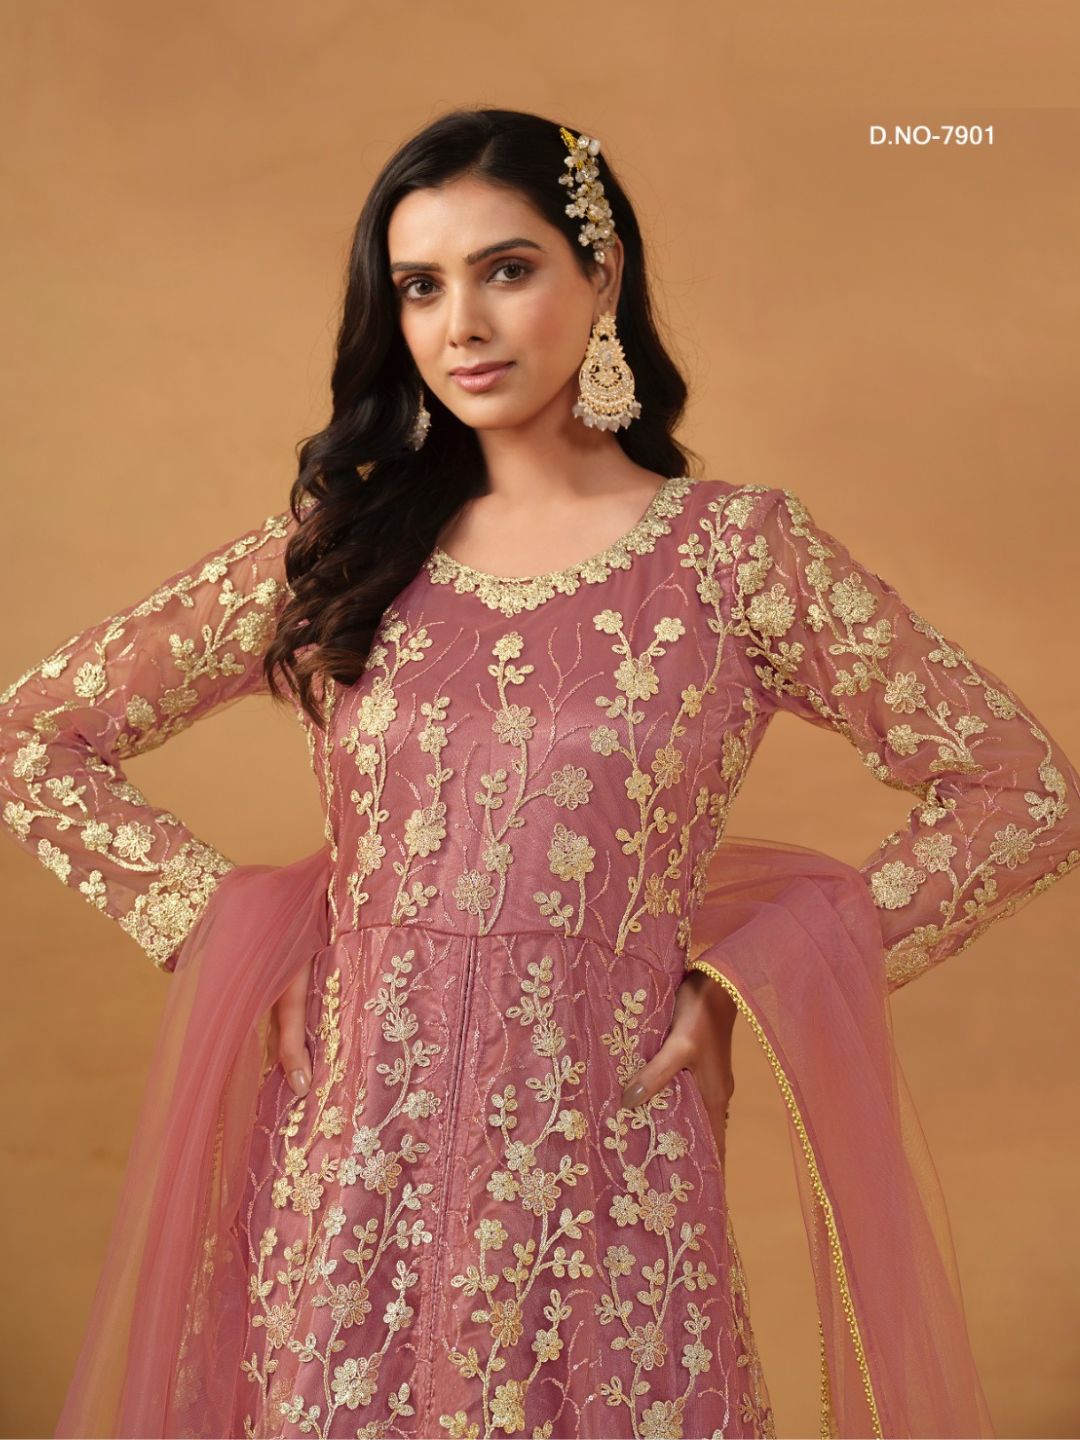 Net Embroidered Bollywood Salwar Kameez in Pink with Stone work-81993